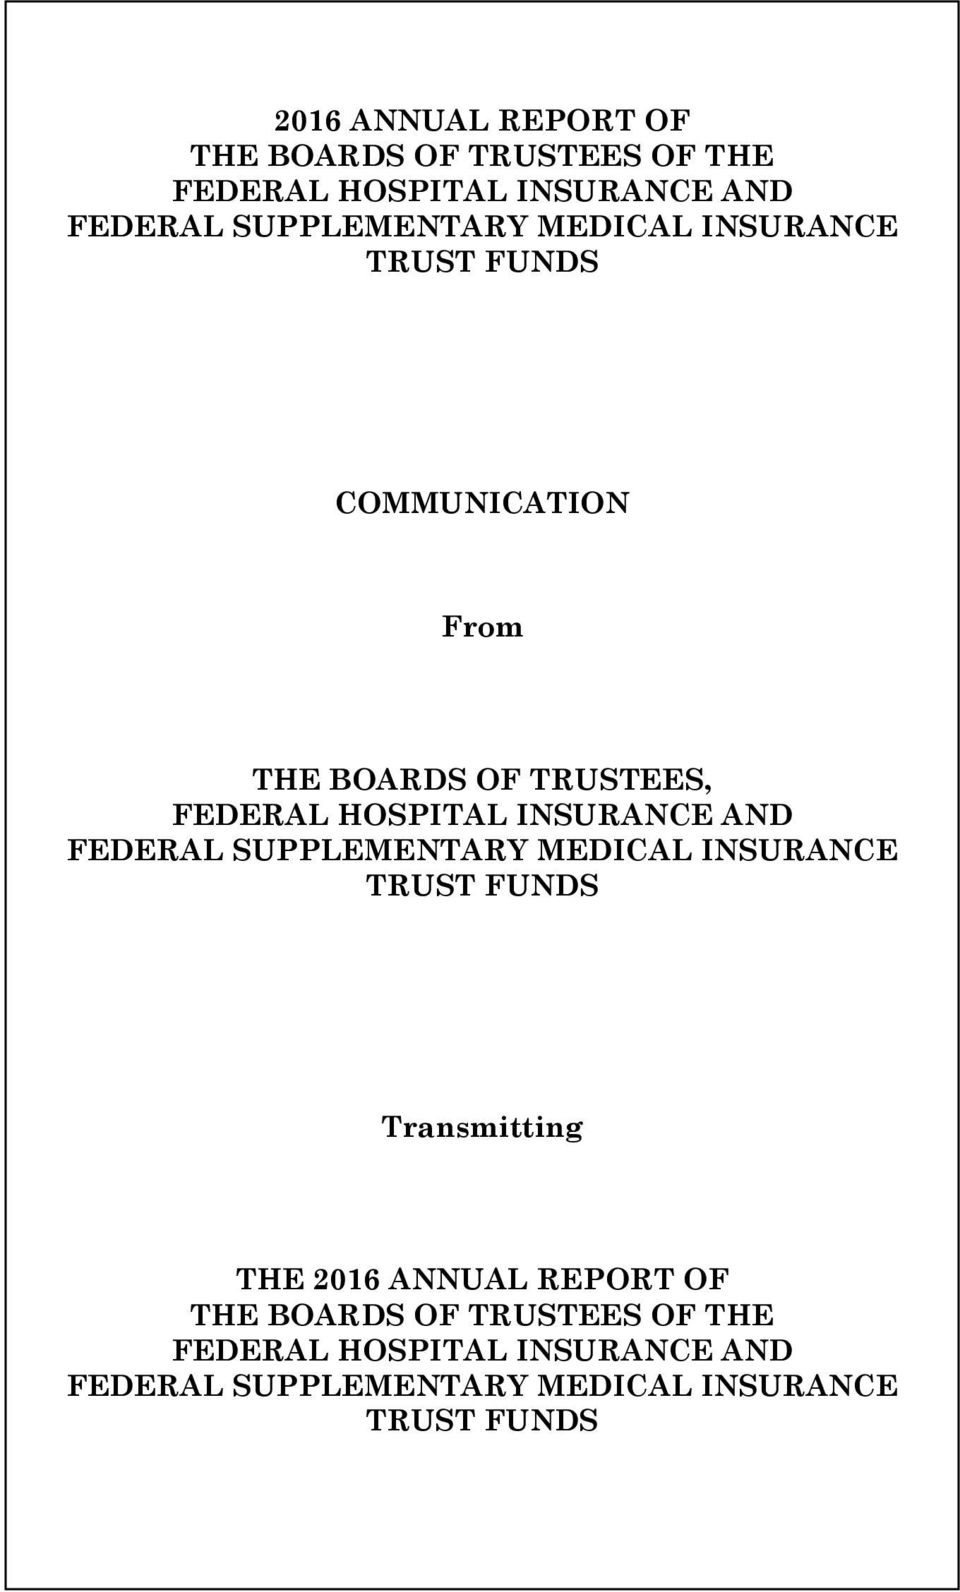 HOSPITAL INSURANCE AND FEDERAL SUPPLEMENTARY MEDICAL INSURANCE TRUST FUNDS Transmitting THE 